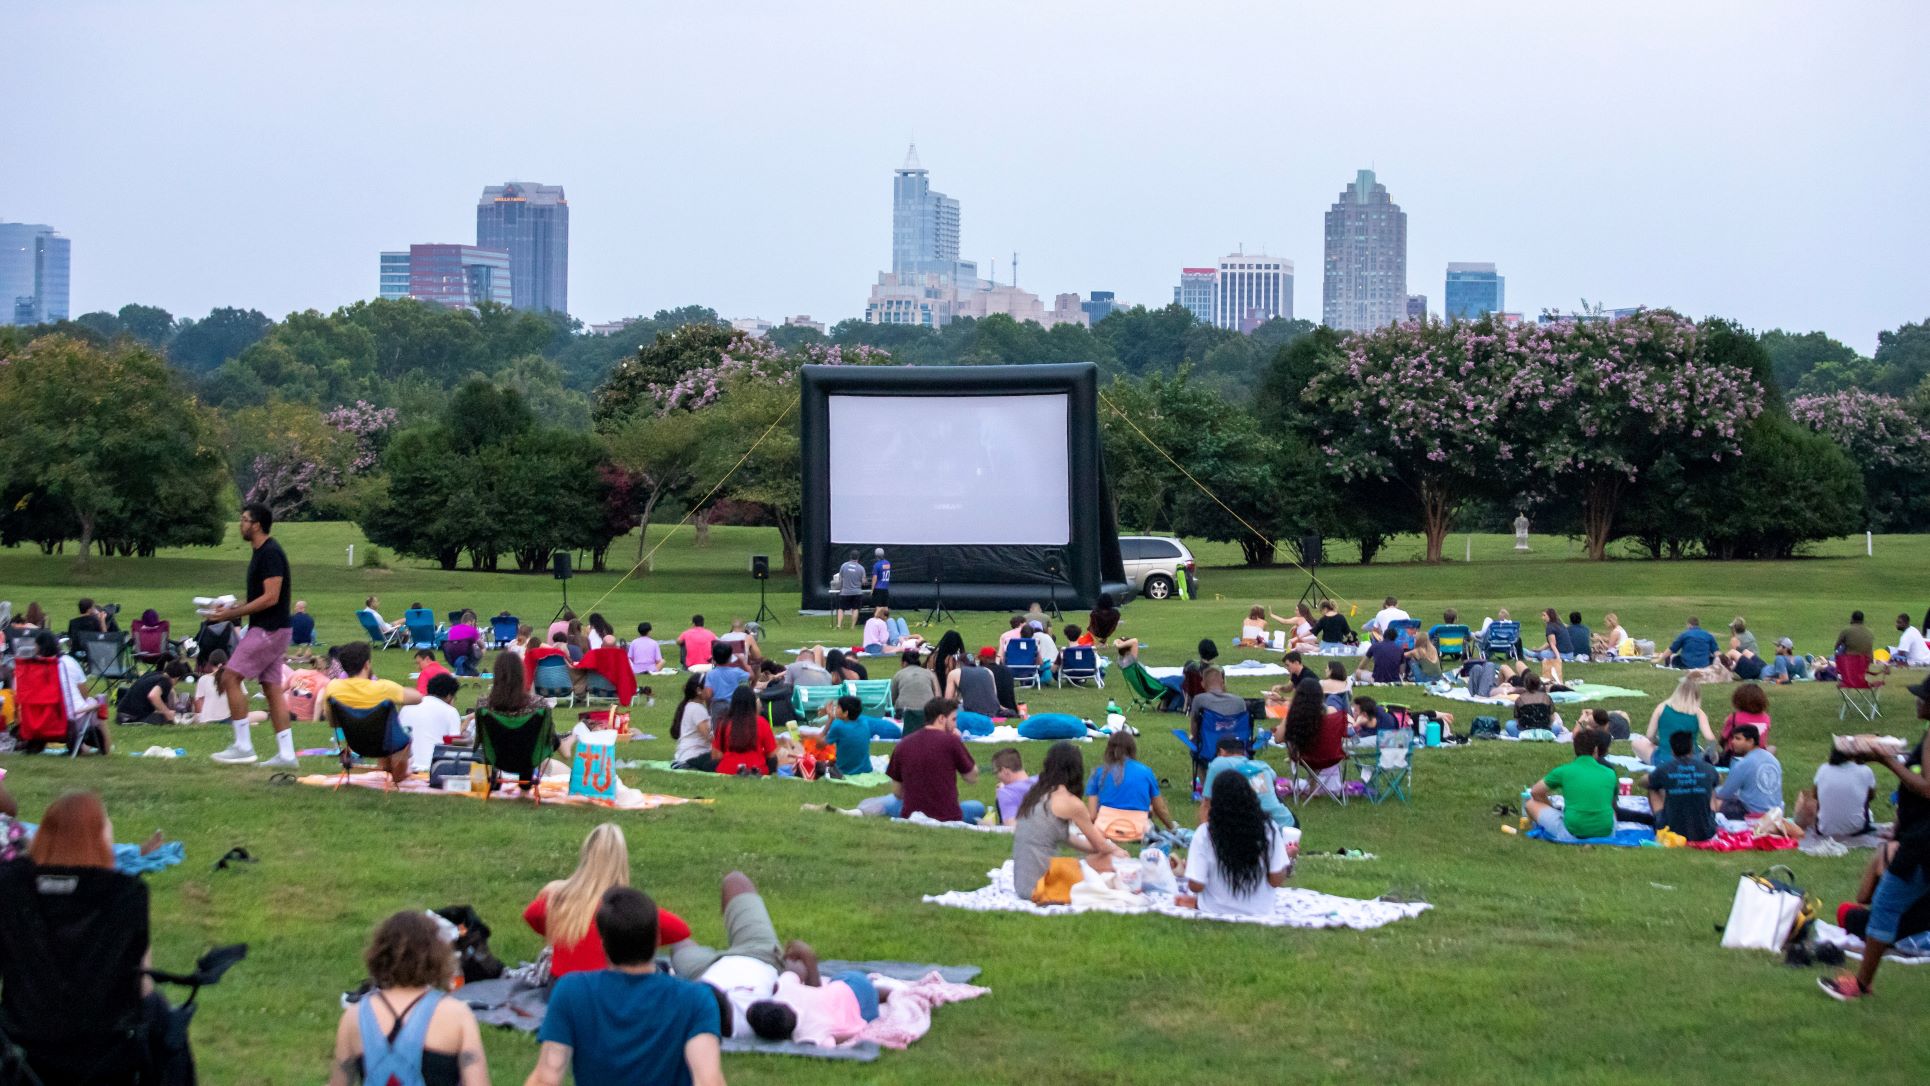 Movies on the Lawn - outdoor movie at Dix Park